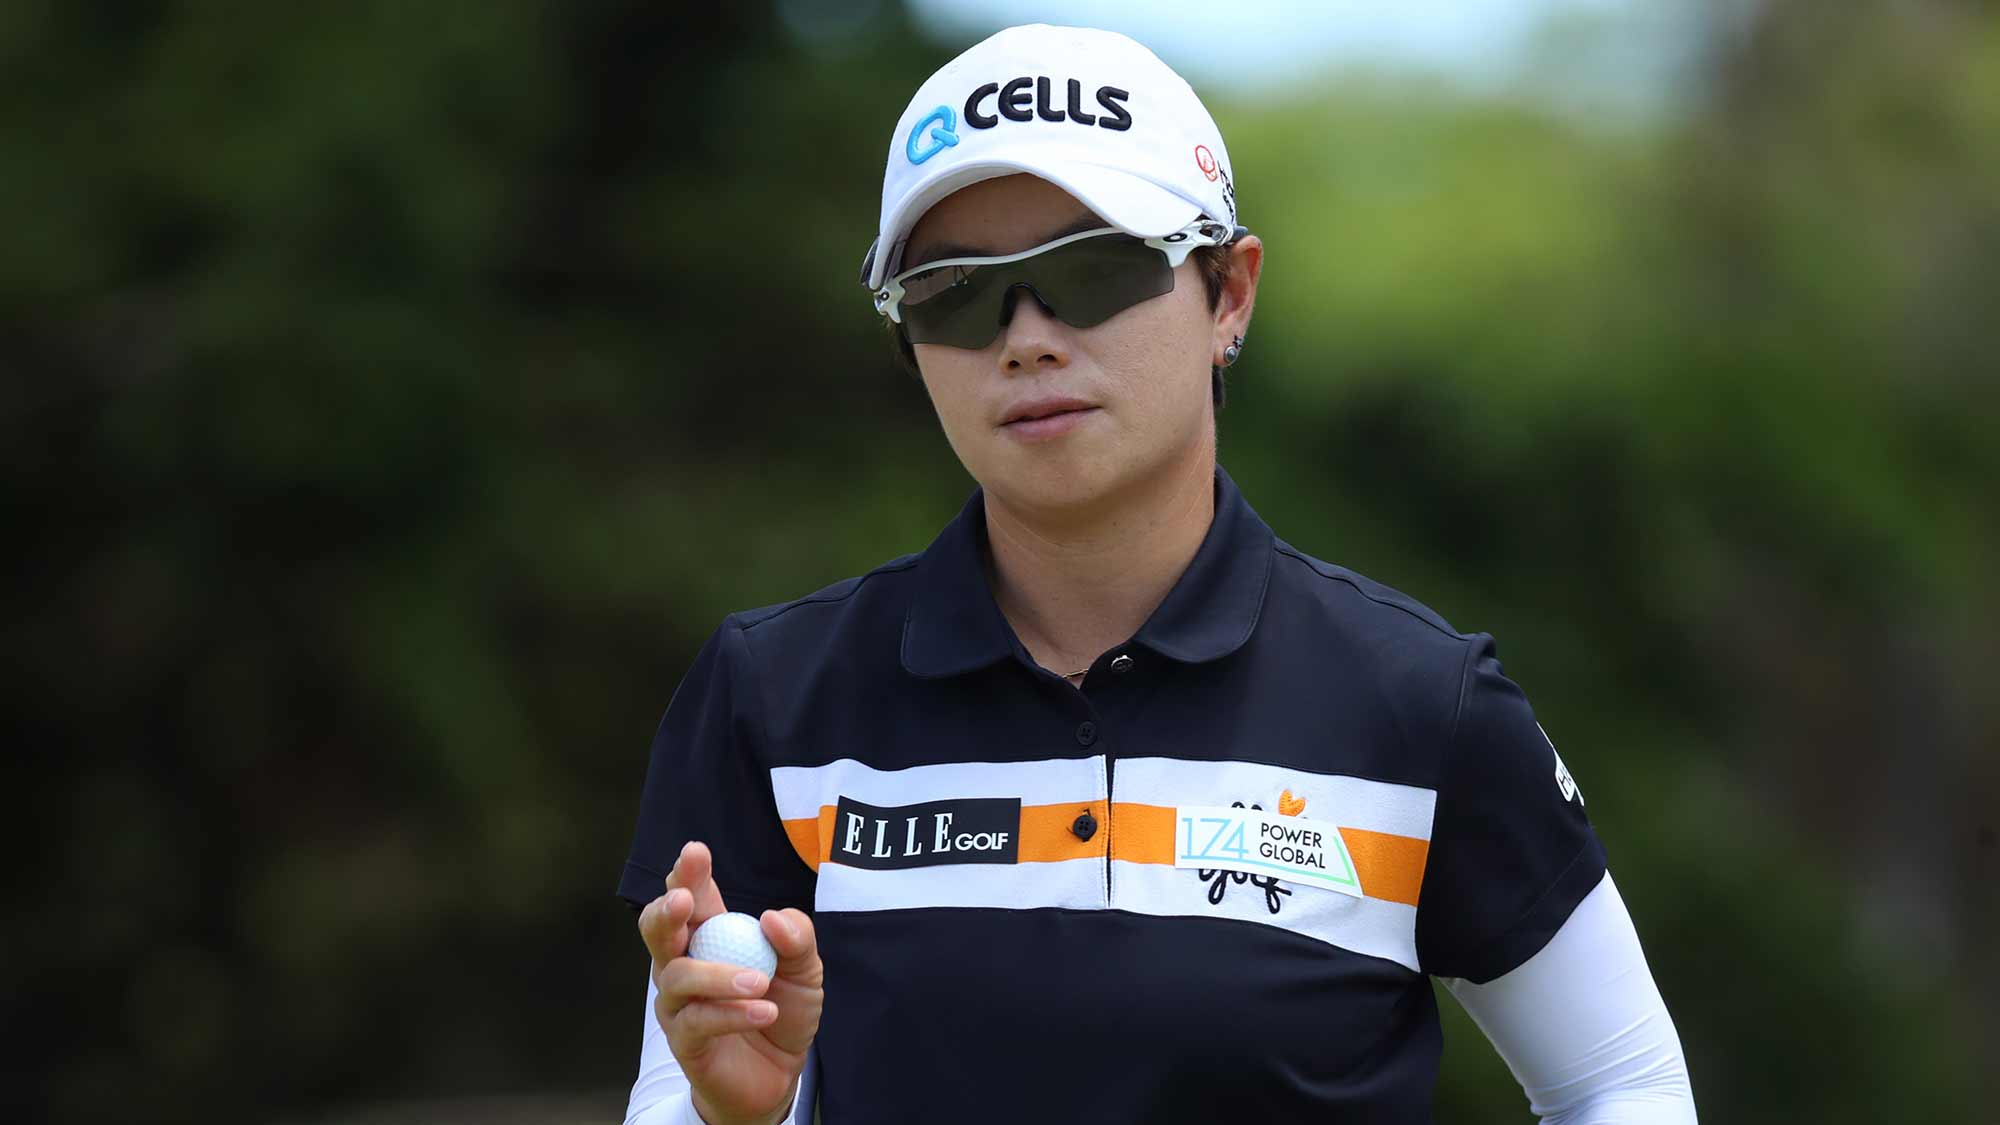 Eun-Hee Ji of South Korea reacts to a par on the fourth green during the third round of the LOTTE Championship on April 20, 2019 in Kapolei, Hawaii